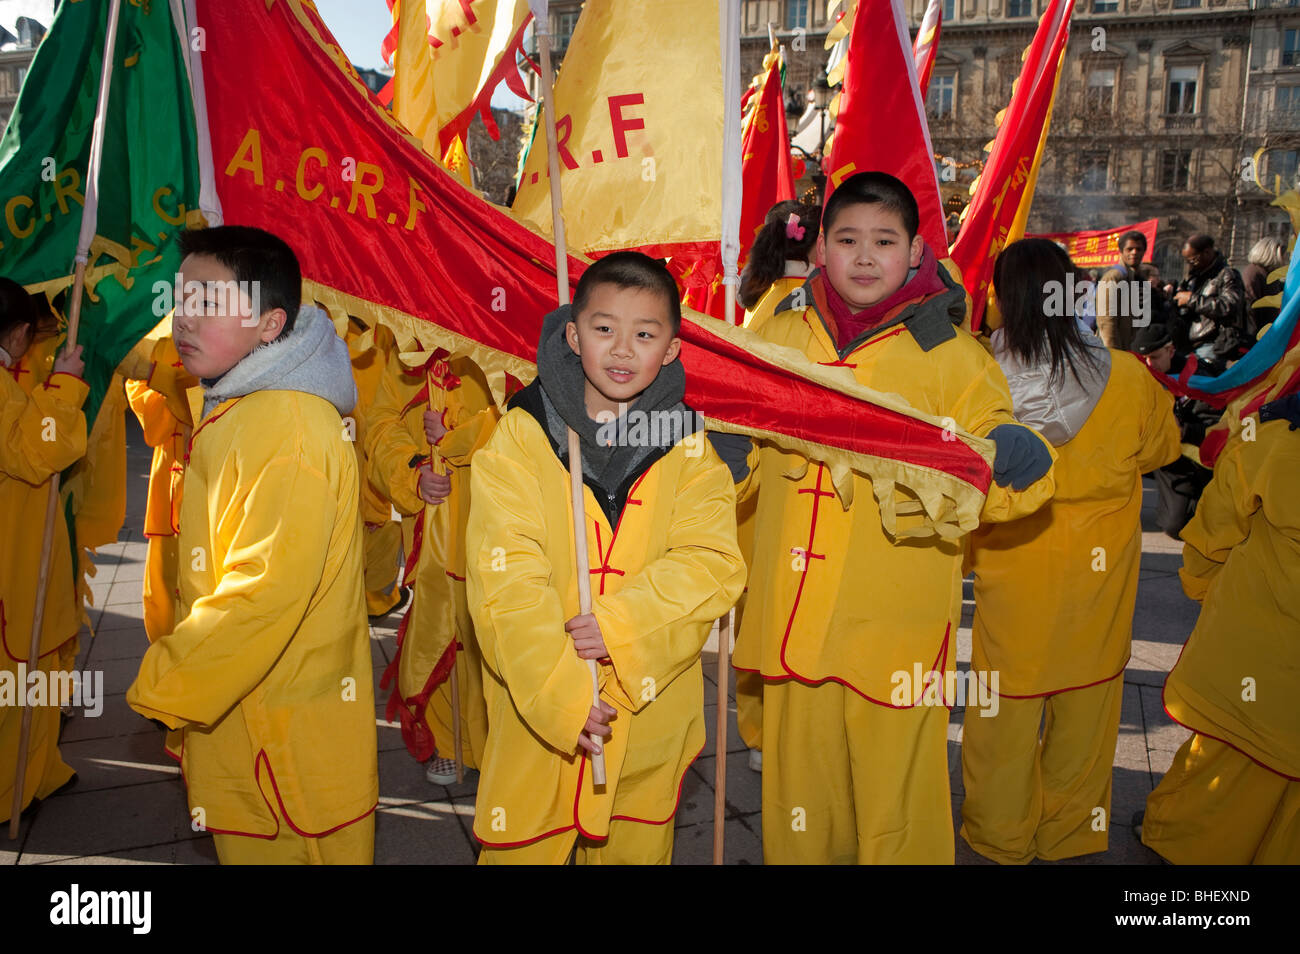 Paris, France, Asians Celebrating 'Chinese New year' Annual Street Carnival Parade, group children outside in Traditional Costumes, different cultures Stock Photo